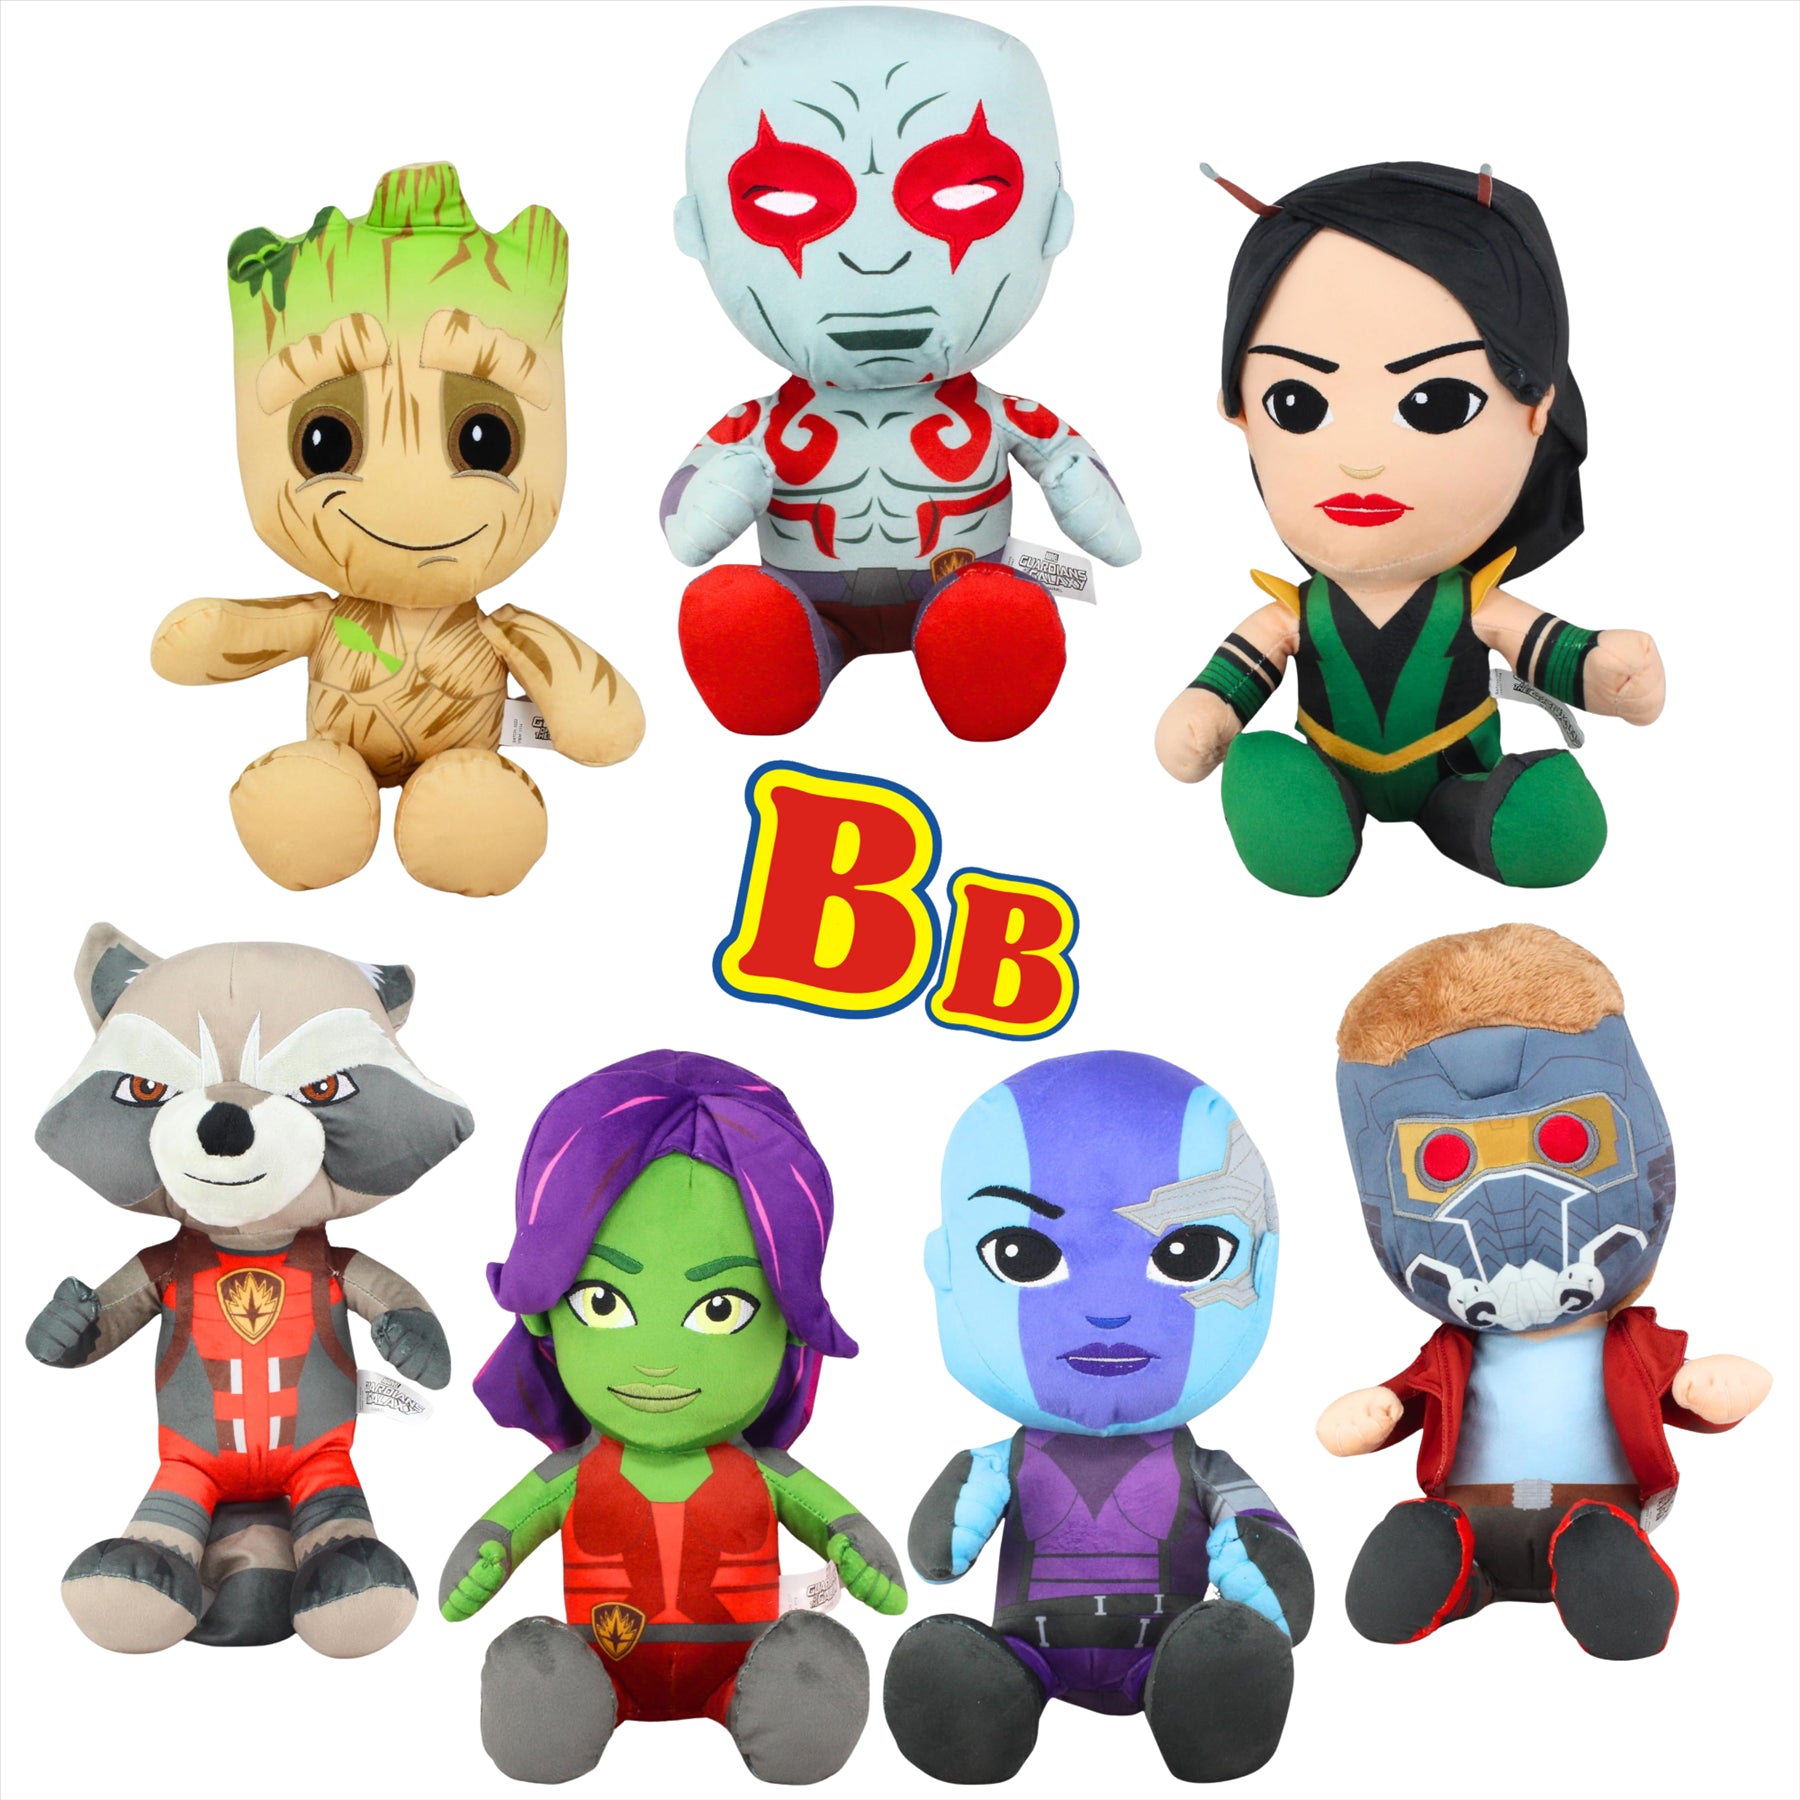 Guardians of the Galaxy Avengers Super Soft Embroidered 36cm Plush Toys - Set of All 7 - Toptoys2u